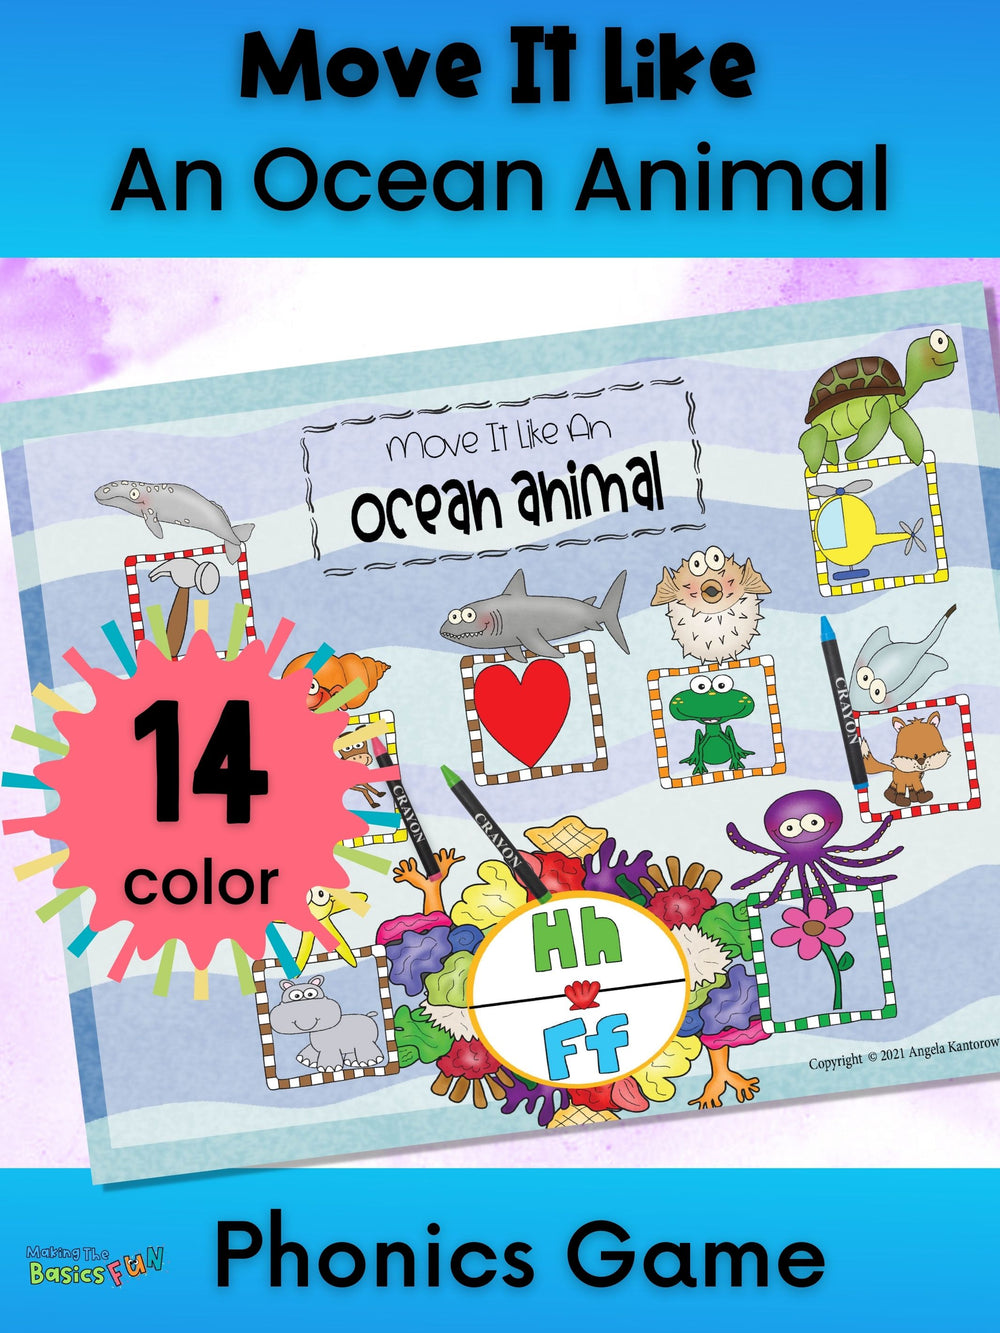 Phonics game colored printable, Move It Like An Ocean Animal,  with i0nitial consonant spinner H/F surround by pictures that start with H/F sound.